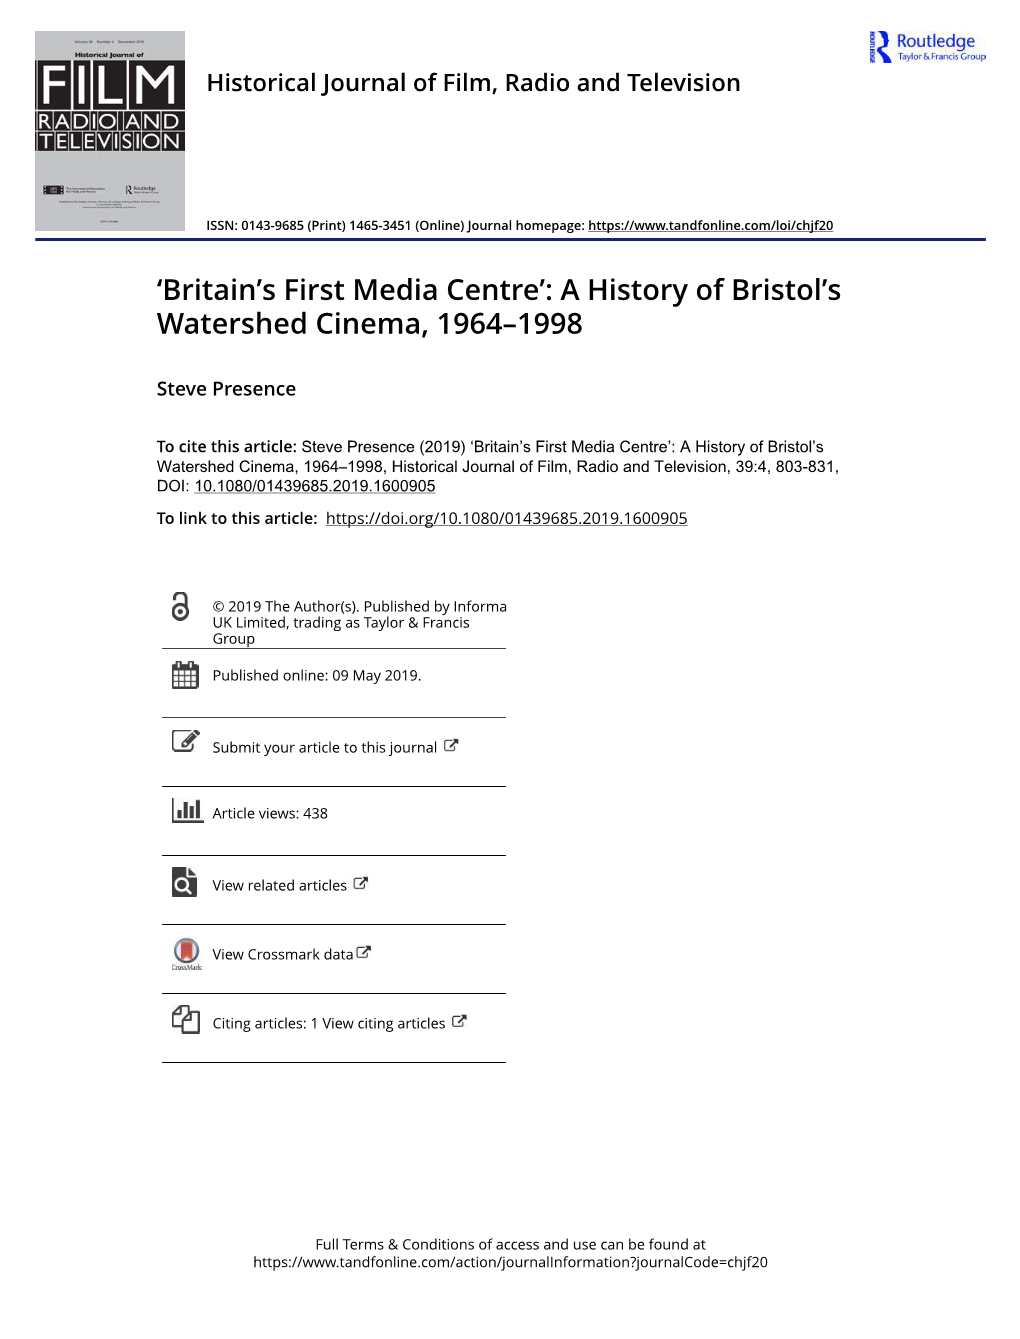 'Britain's First Media Centre': a History of Bristol's Watershed Cinema